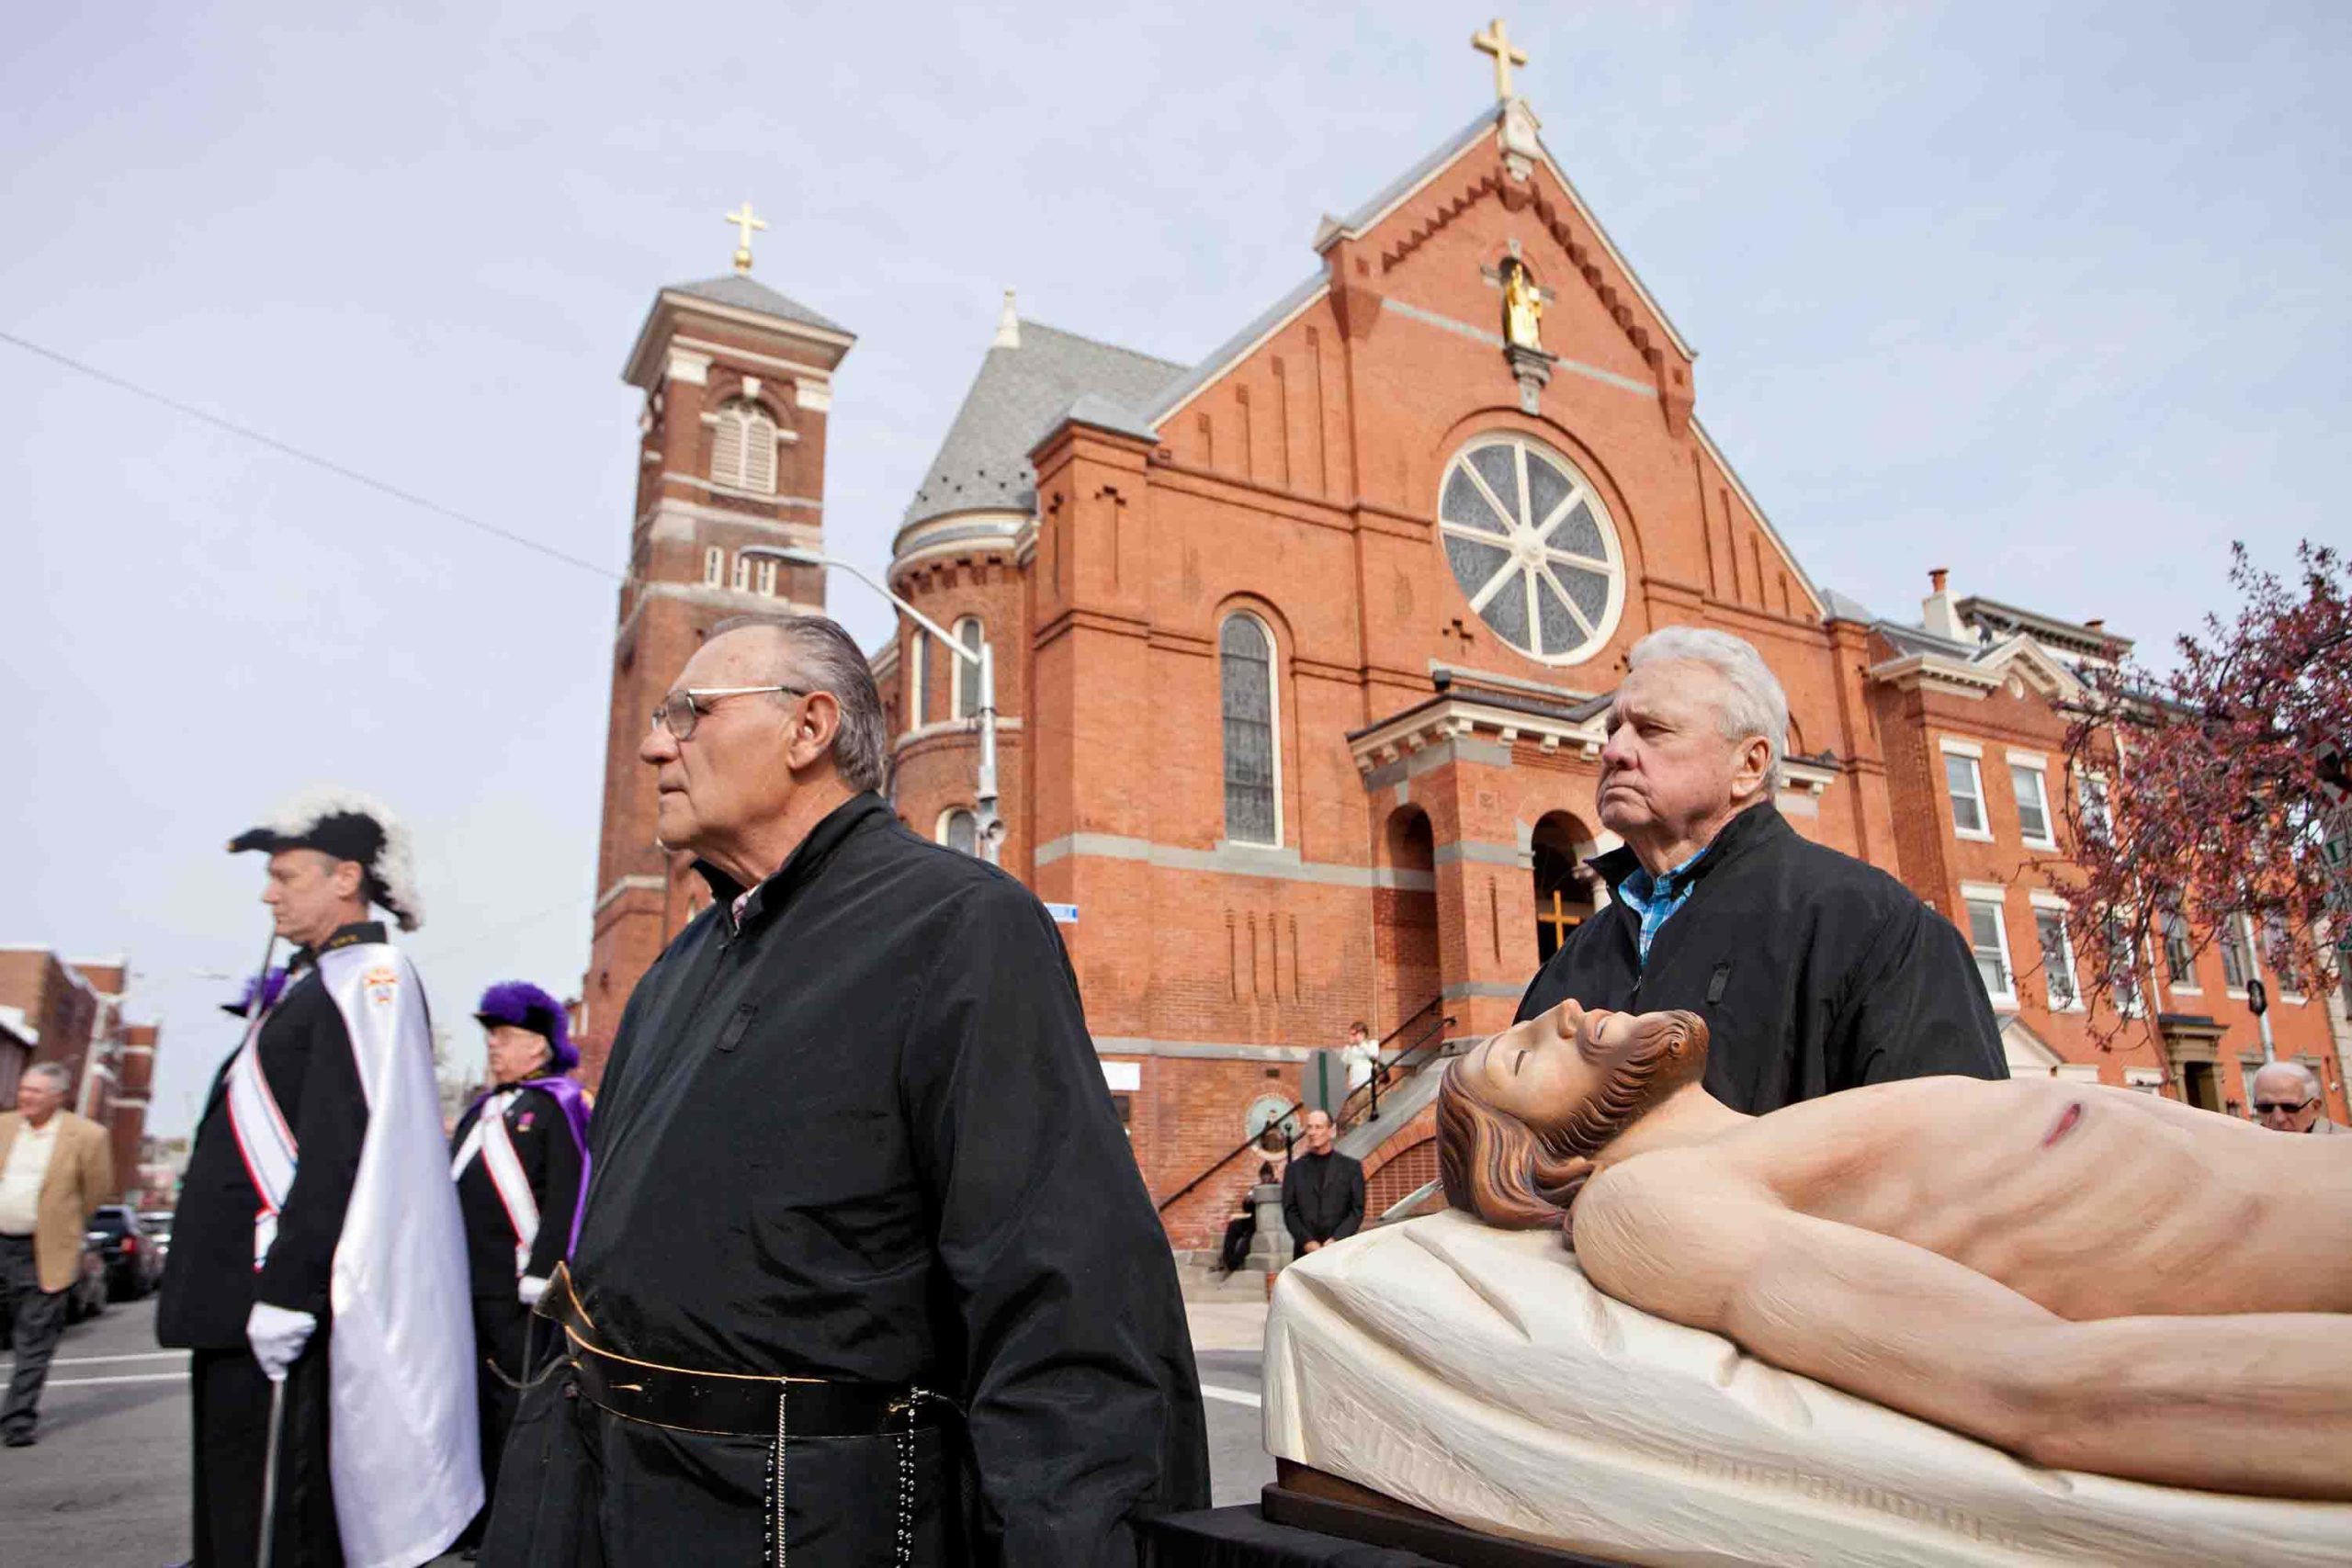 In streets of Little Italy, St. Leo parishioners remember Christ’s sacrifice